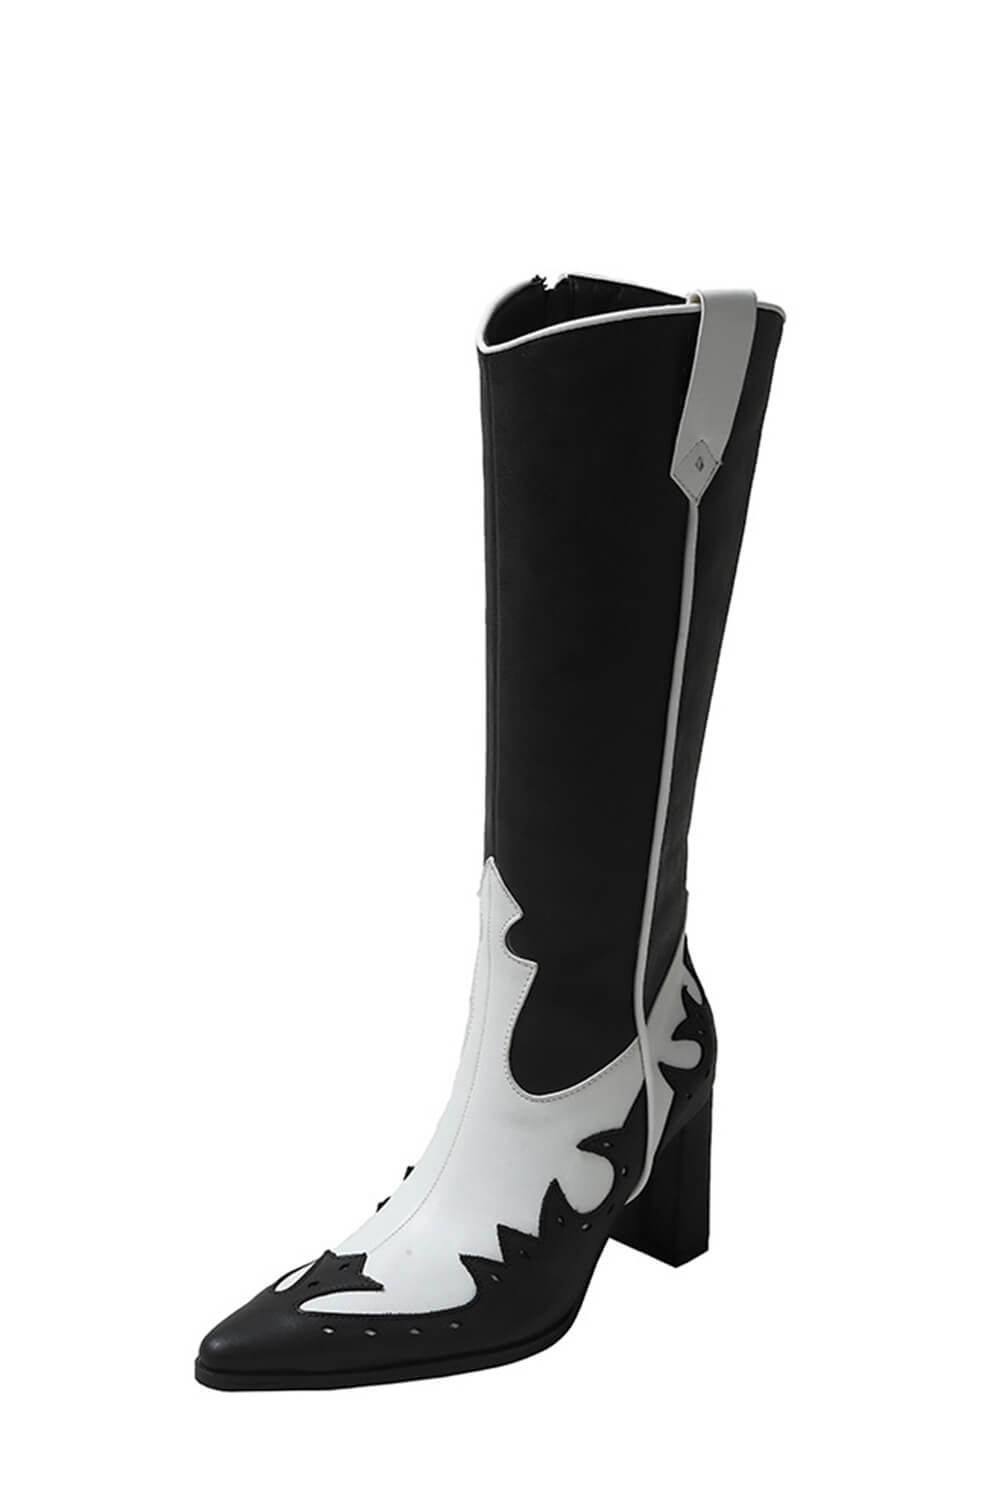 Contrast Western Cowboy Pointed Toe Block Heeled Knee High Boots - Black White